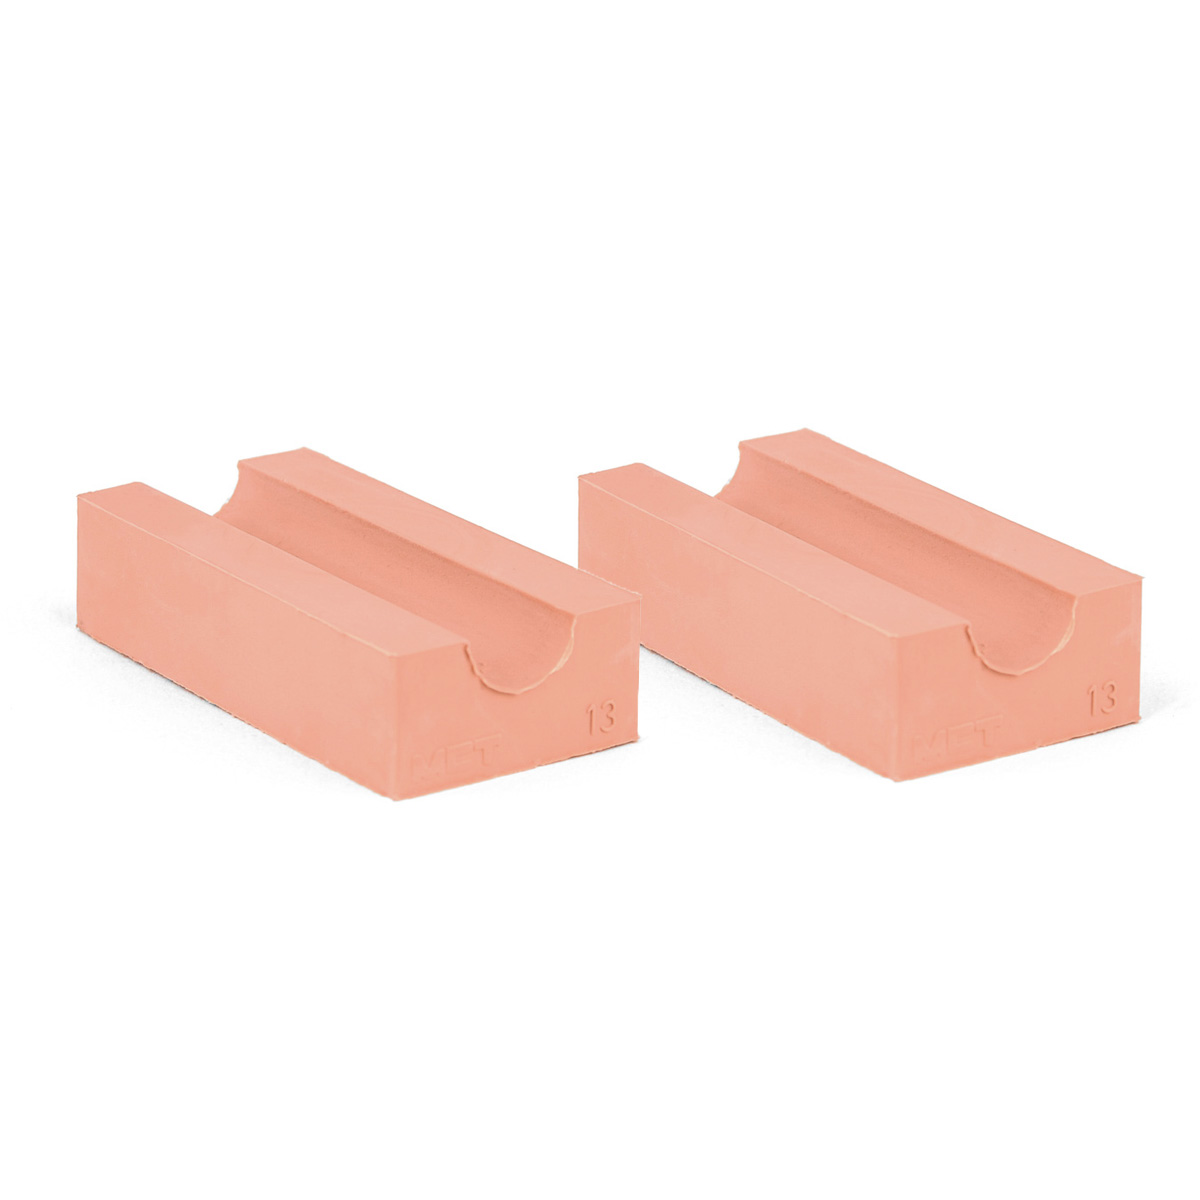 30-13*2 Set of 2 half insert block lycron 30mm, 30-13 for cable/pipe diam. 12.5-13.5mm